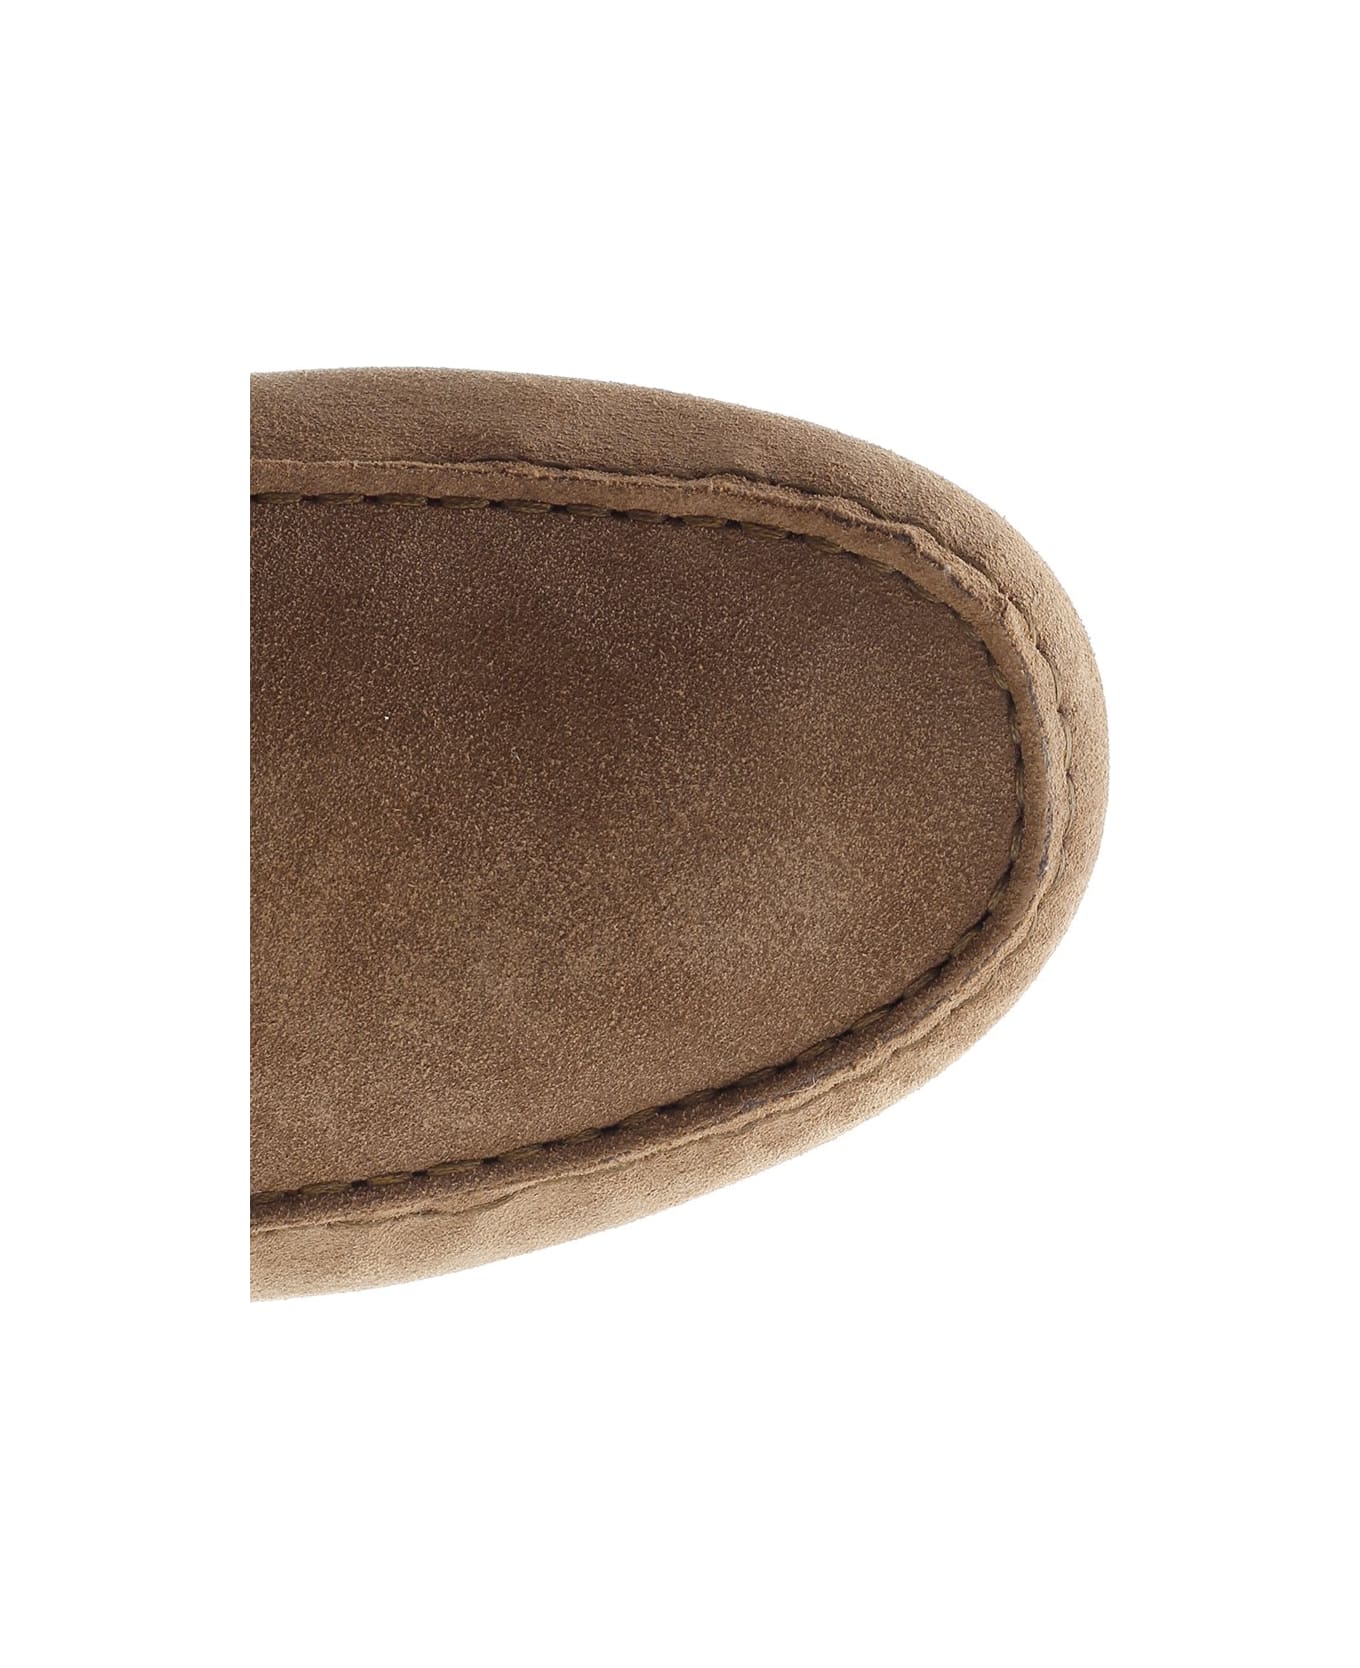 Tod's 'gommino Bubble' Loafer - Brown